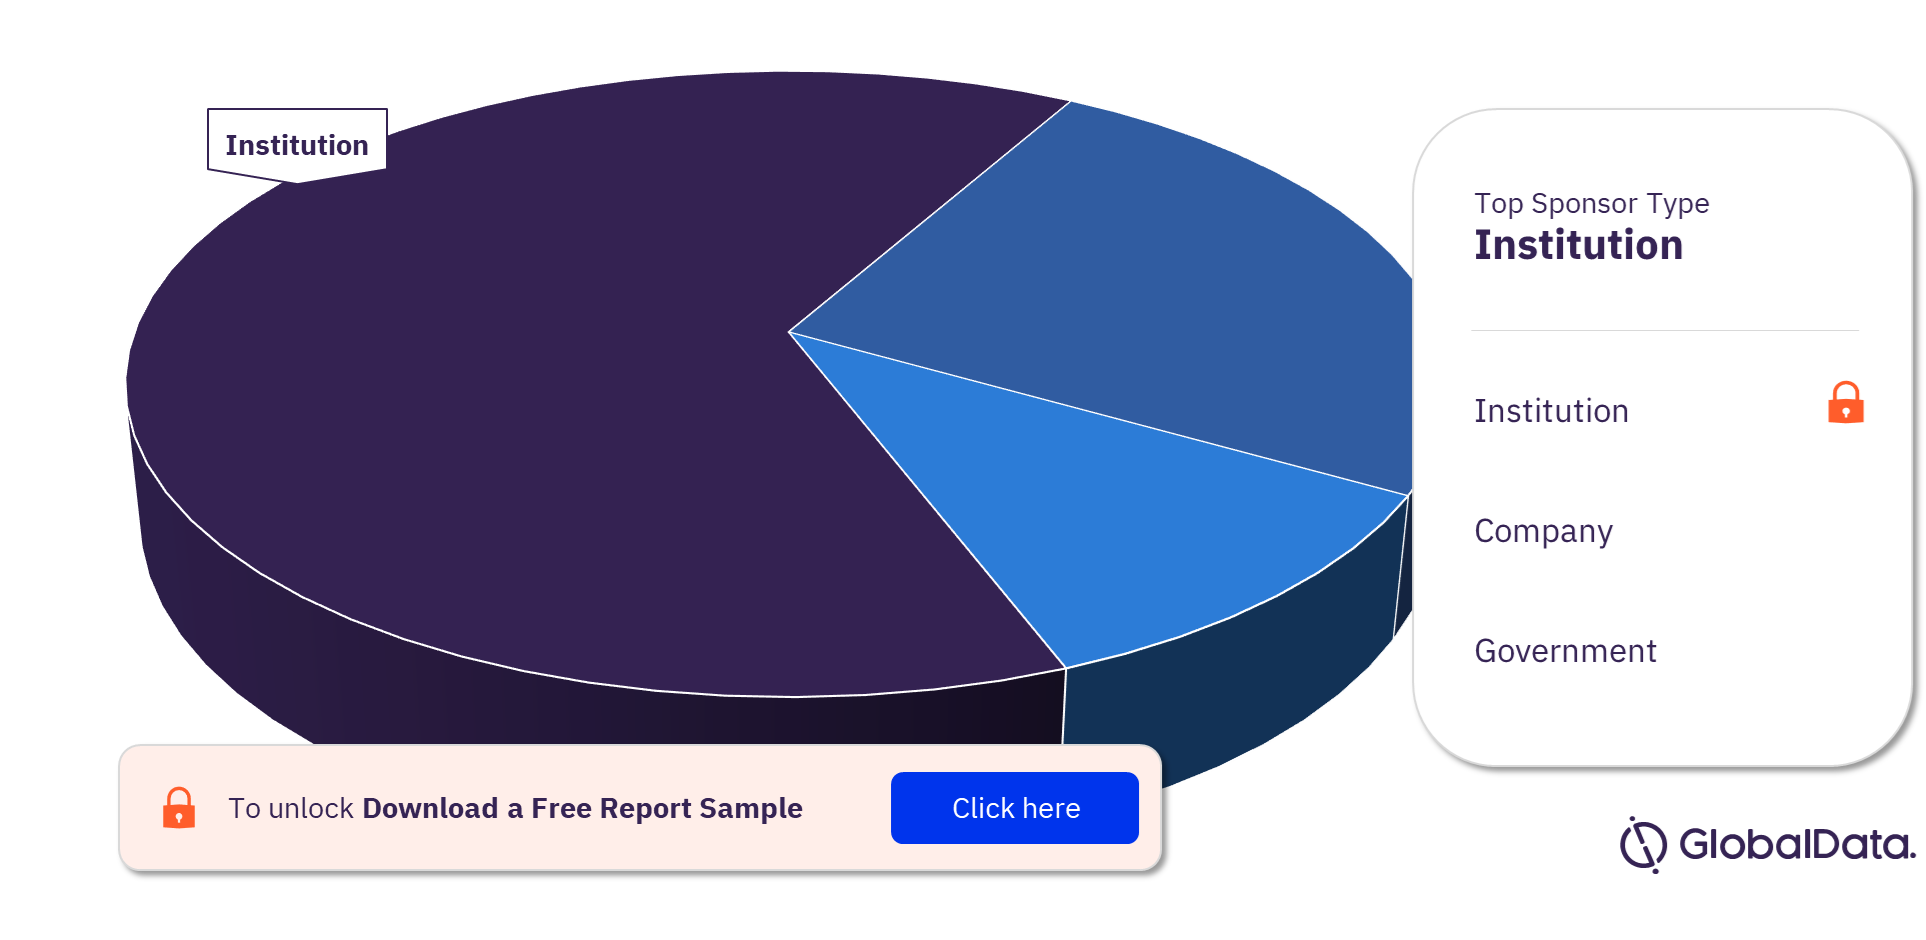 PTSD Clinical Trials Market Analysis by Sponsor Types, 2023 (%)